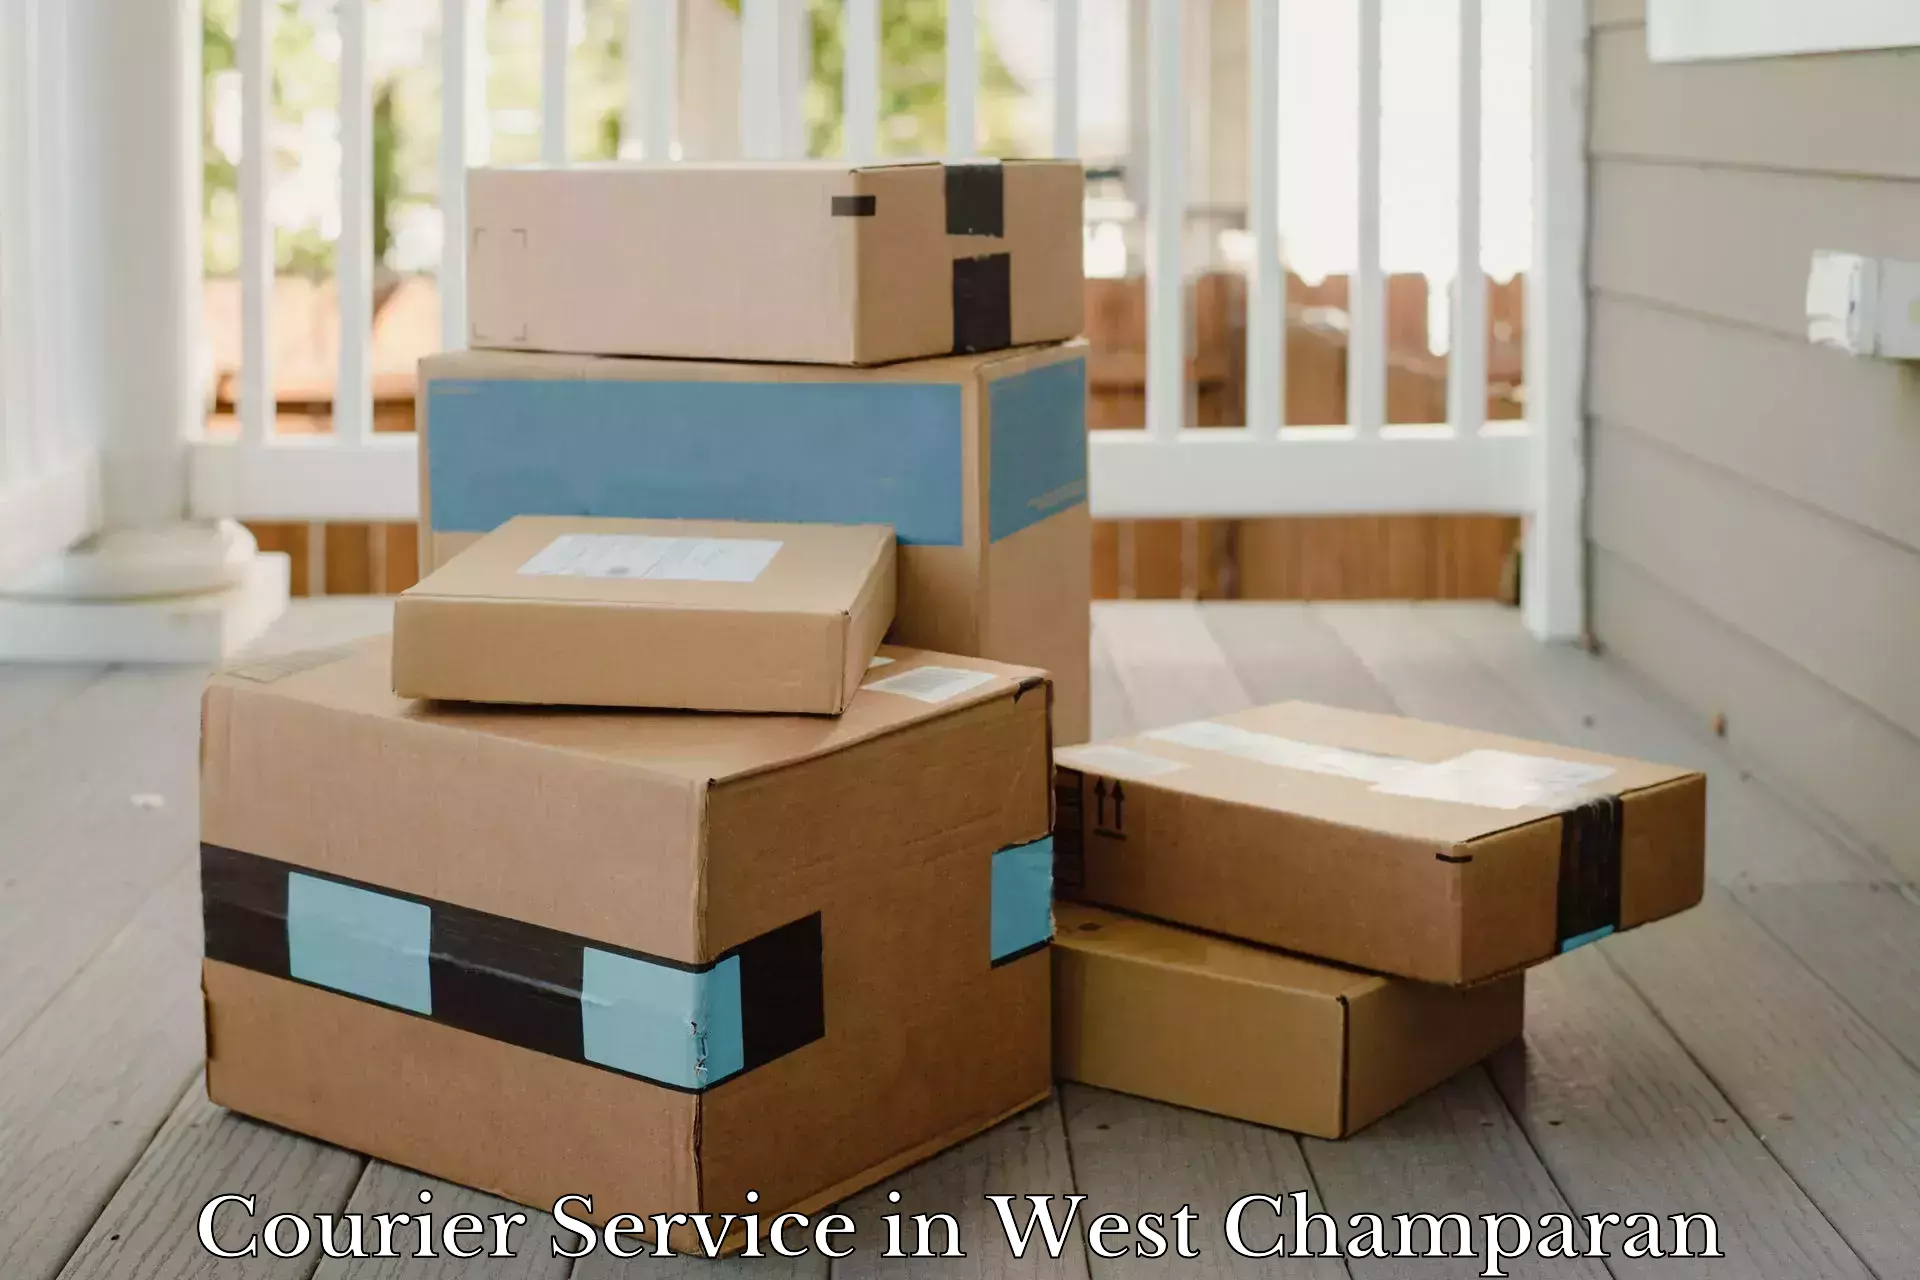 24/7 courier service in West Champaran